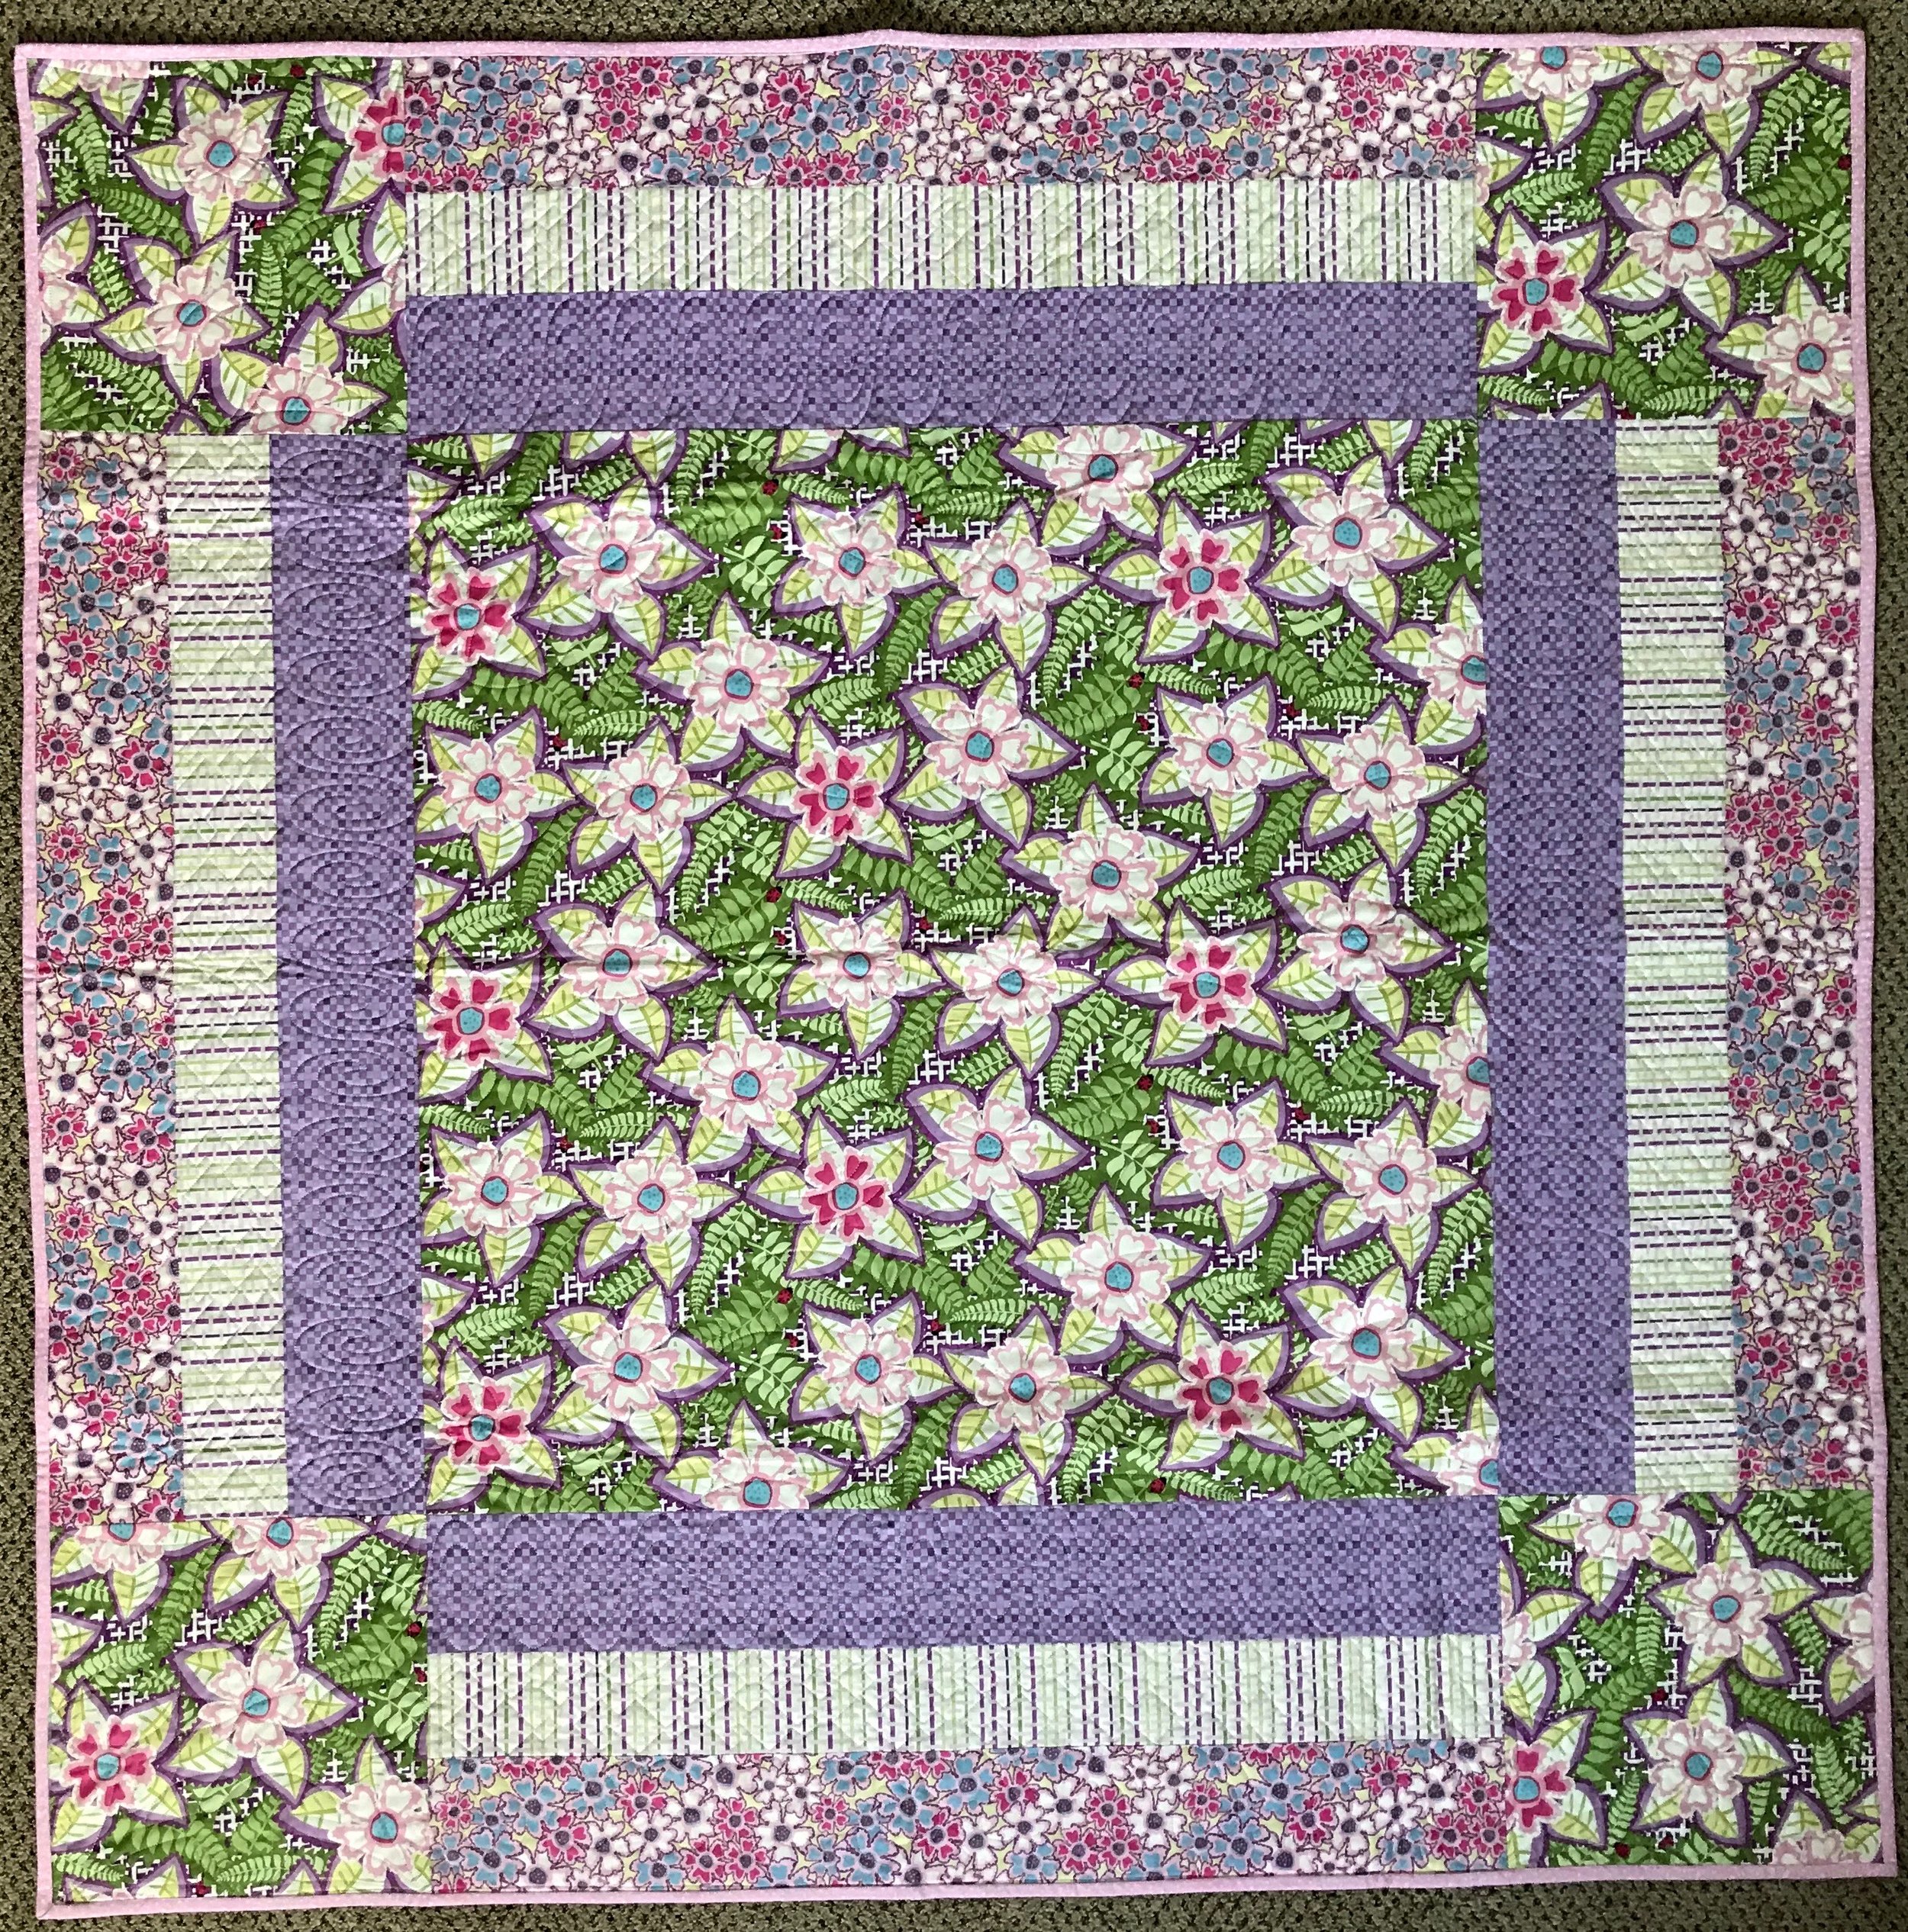 Flowers Galore, Pieced, Hand Quilted, donated by Phyllis Schrag, 54 x 54”